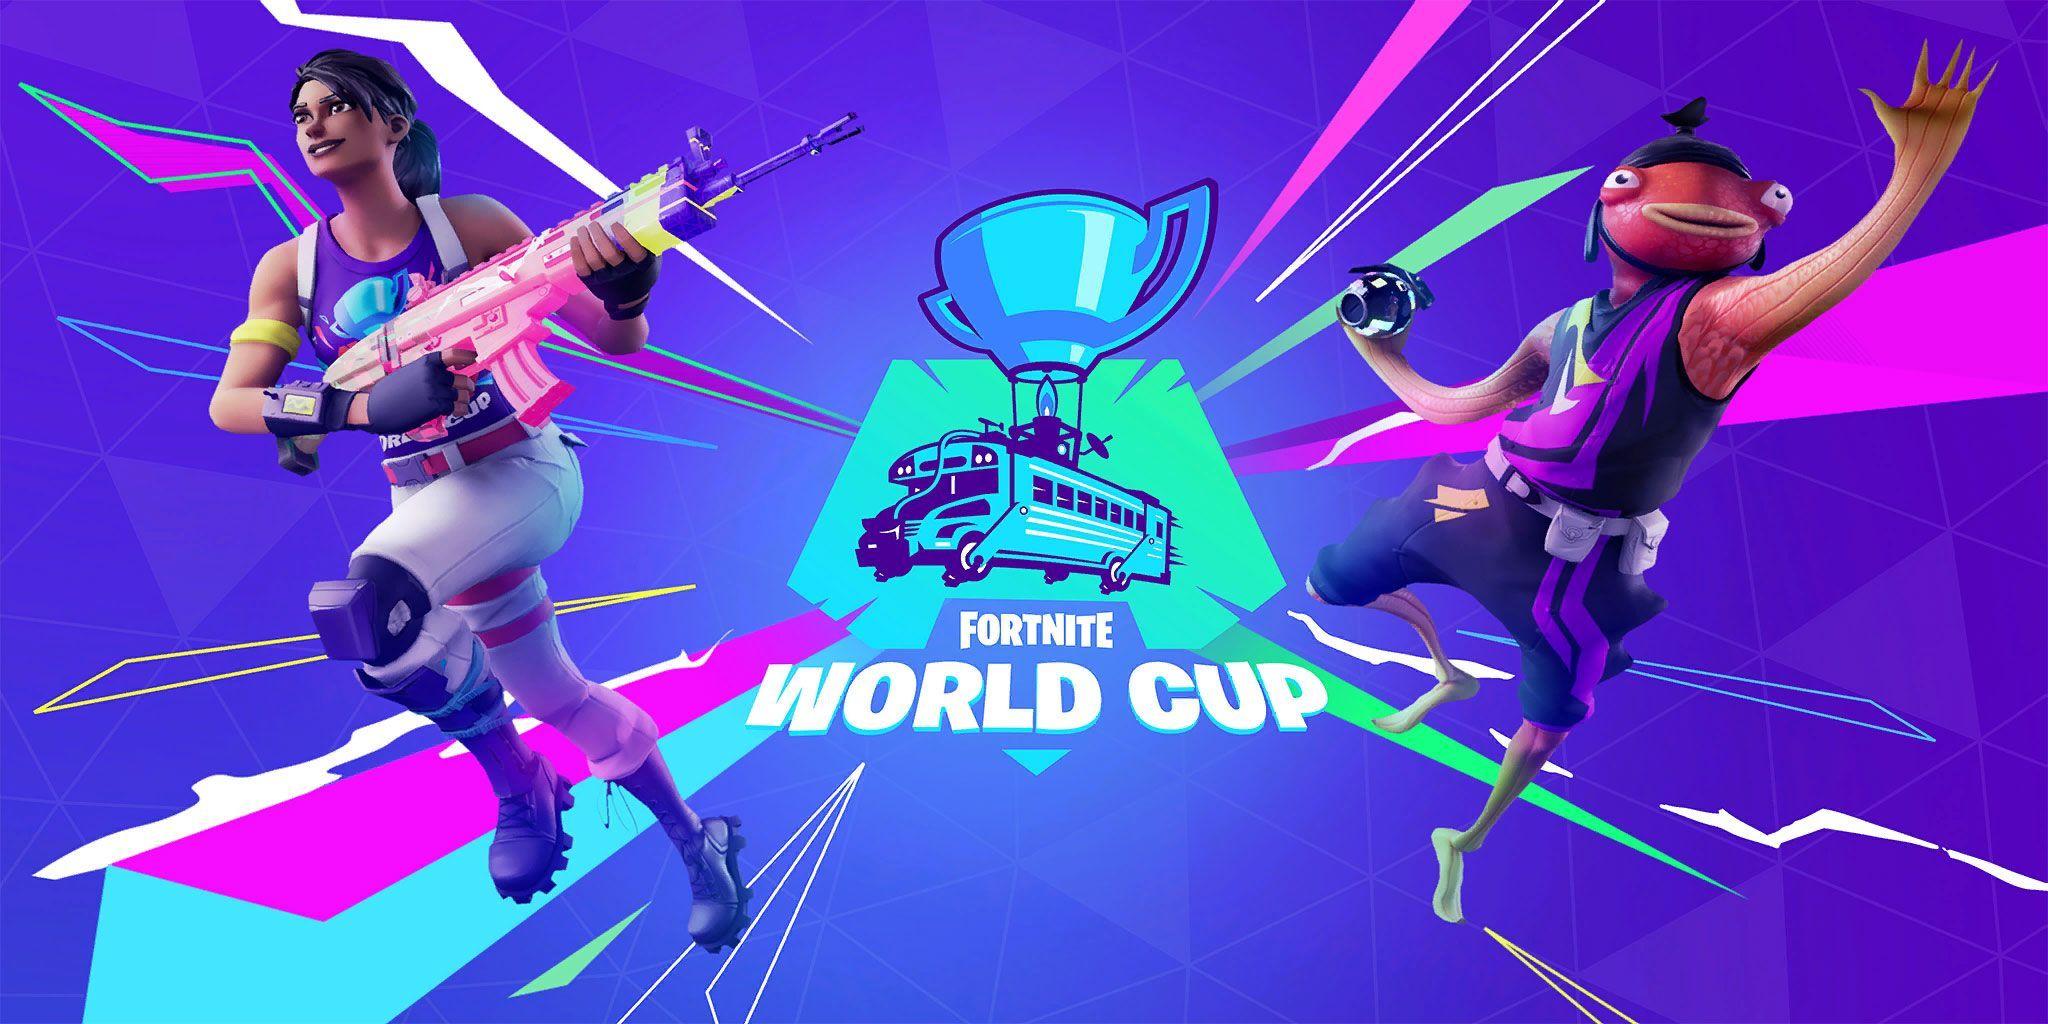 Fortnite World Cup Wallpapers Top Free Fortnite World Cup Backgrounds Wallpaperaccess